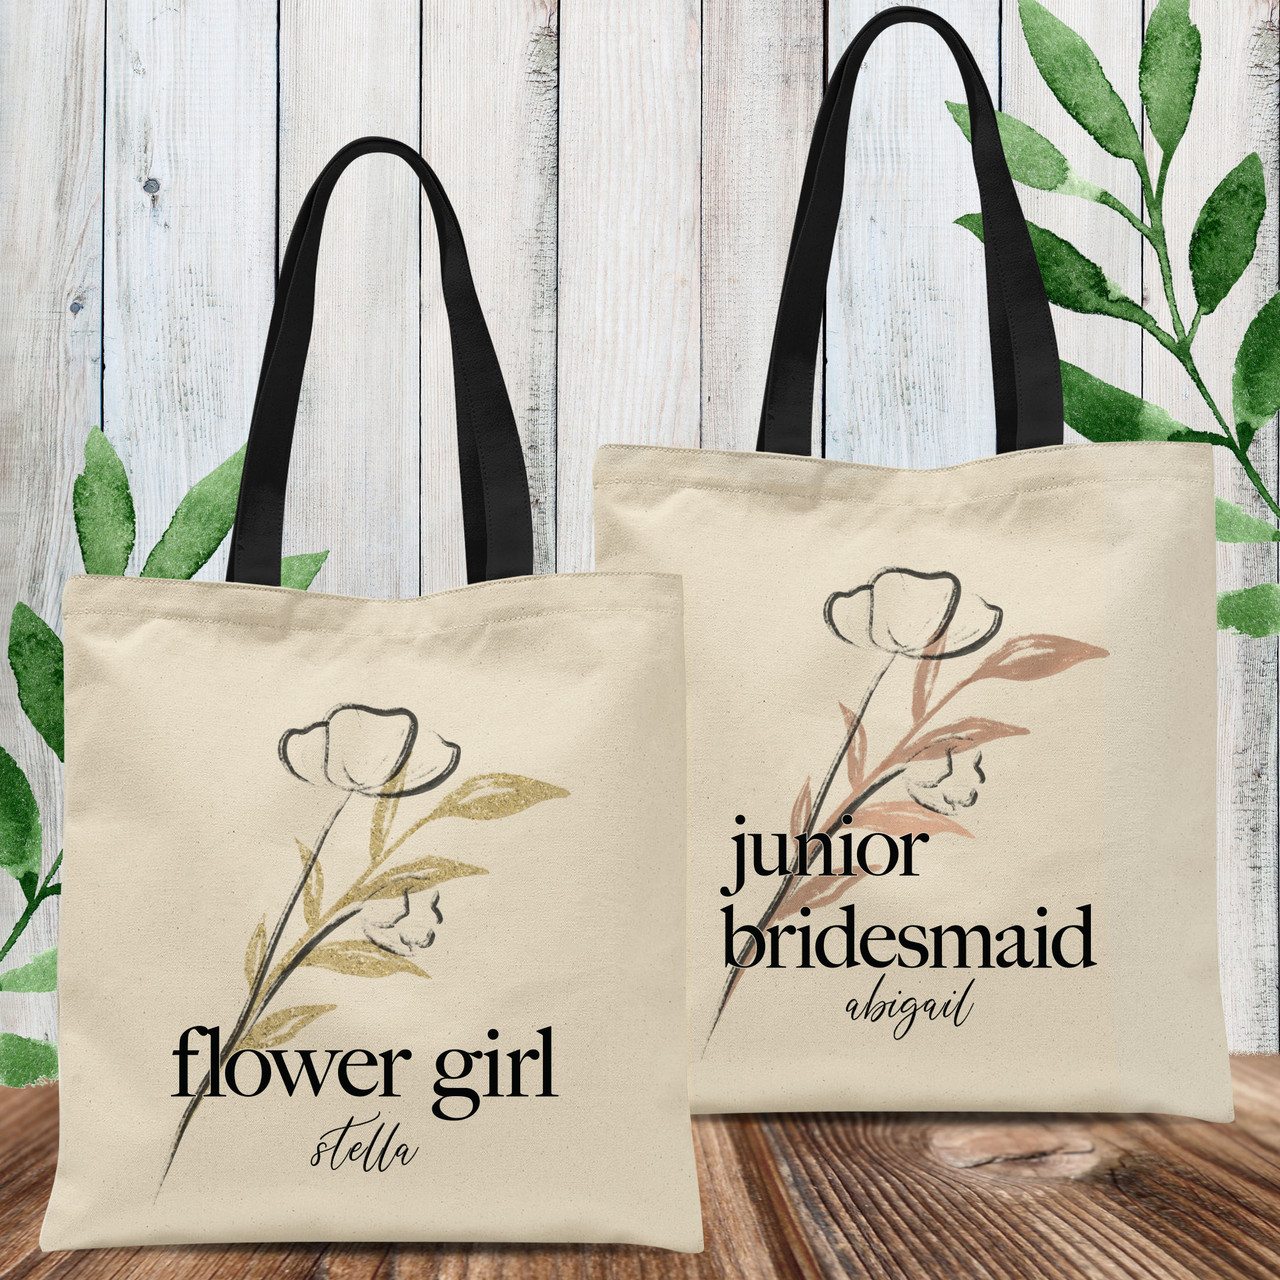 Personalized Tote Bag For Bridesmaids Wedding